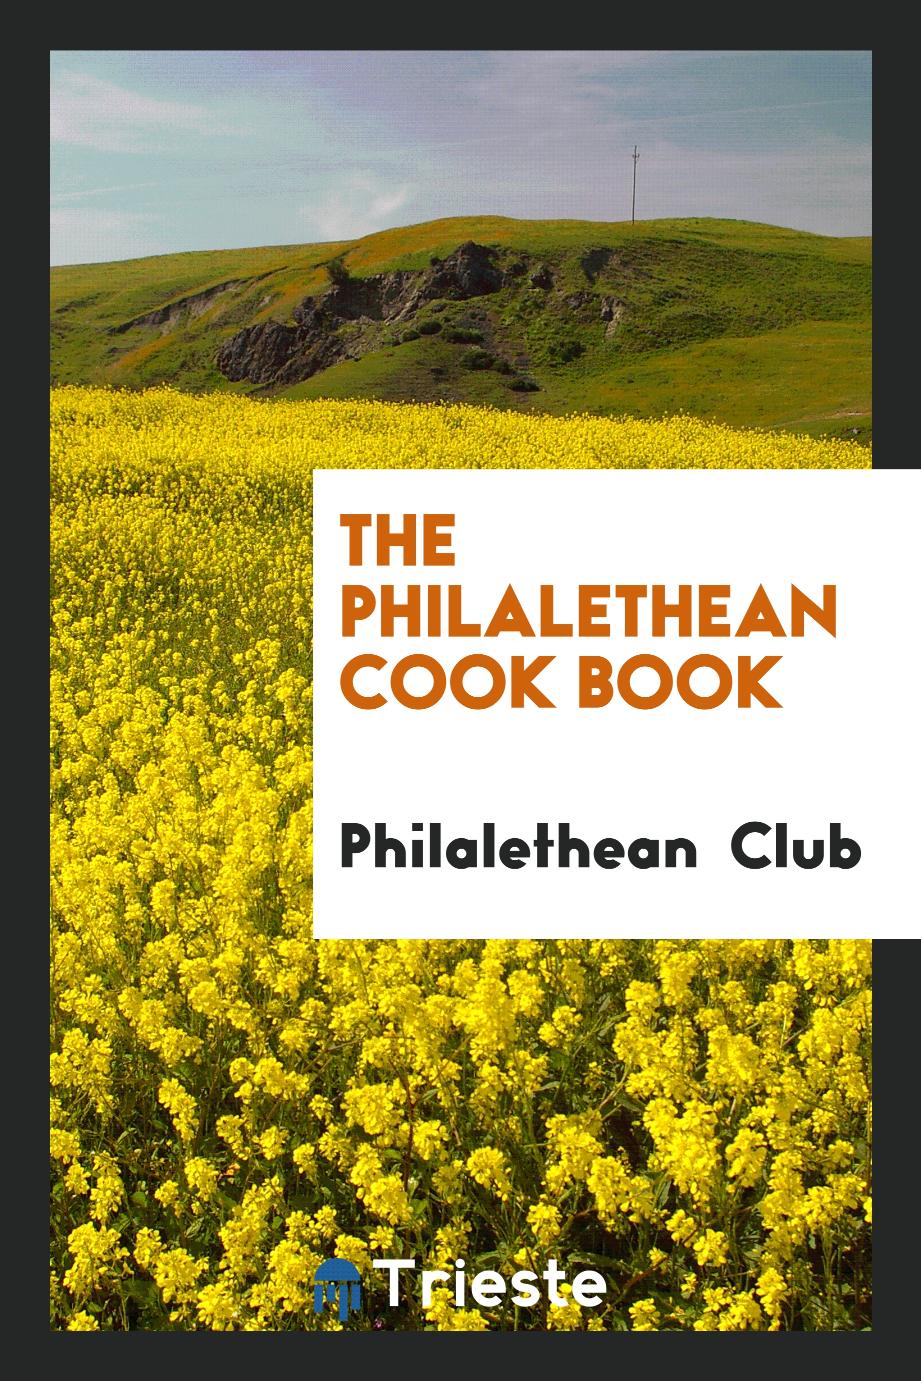 The Philalethean Cook Book